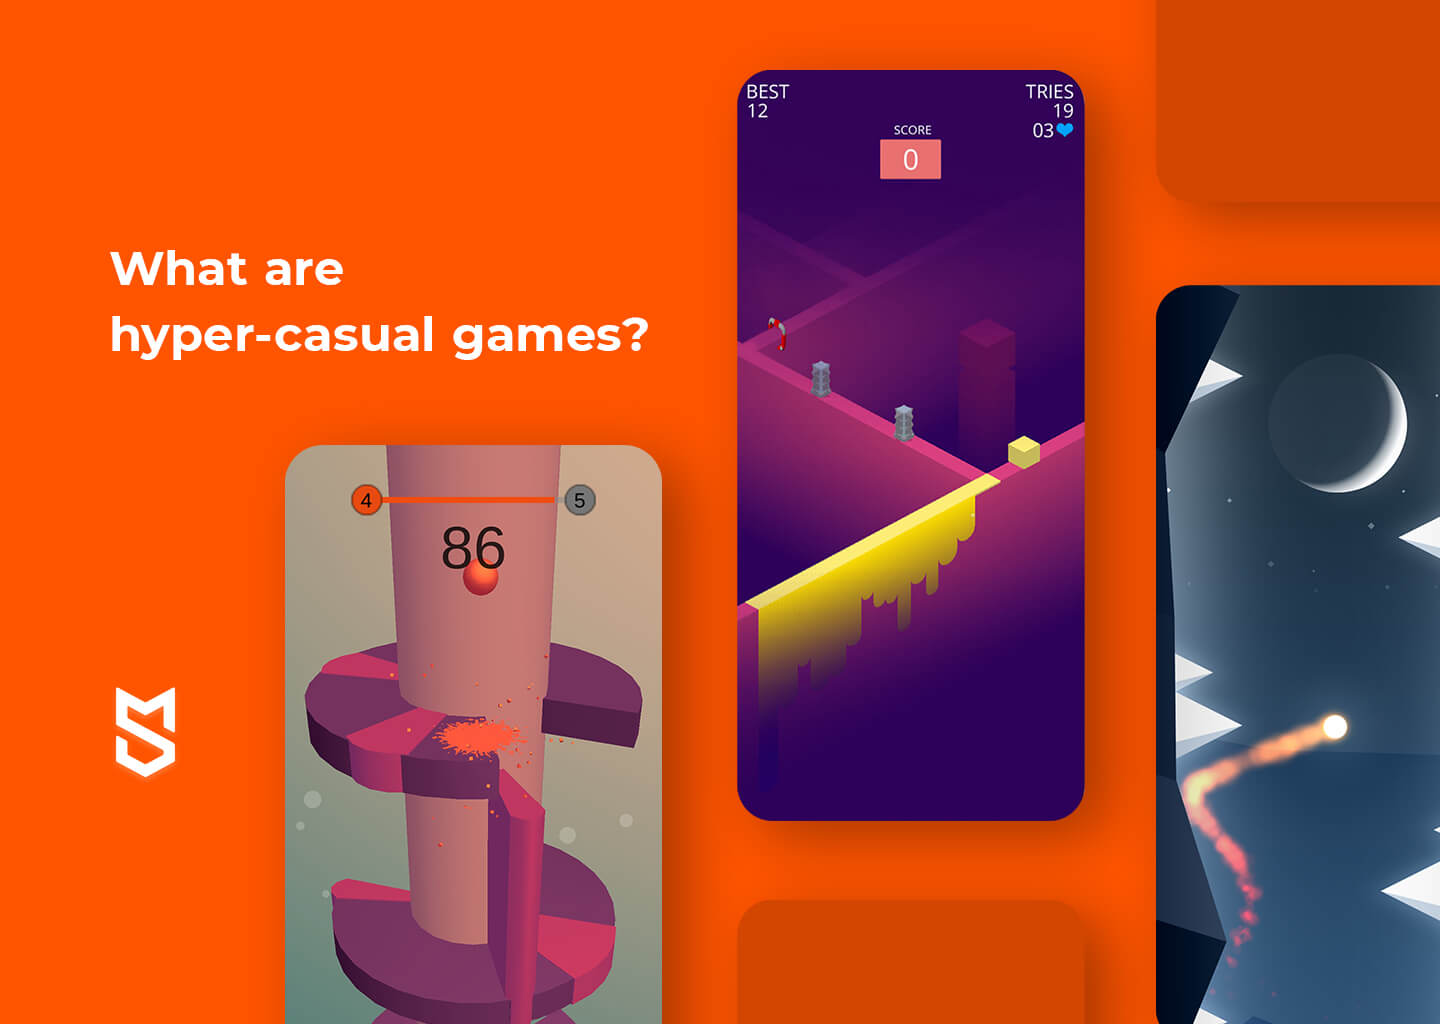 What are hyper-casual games?